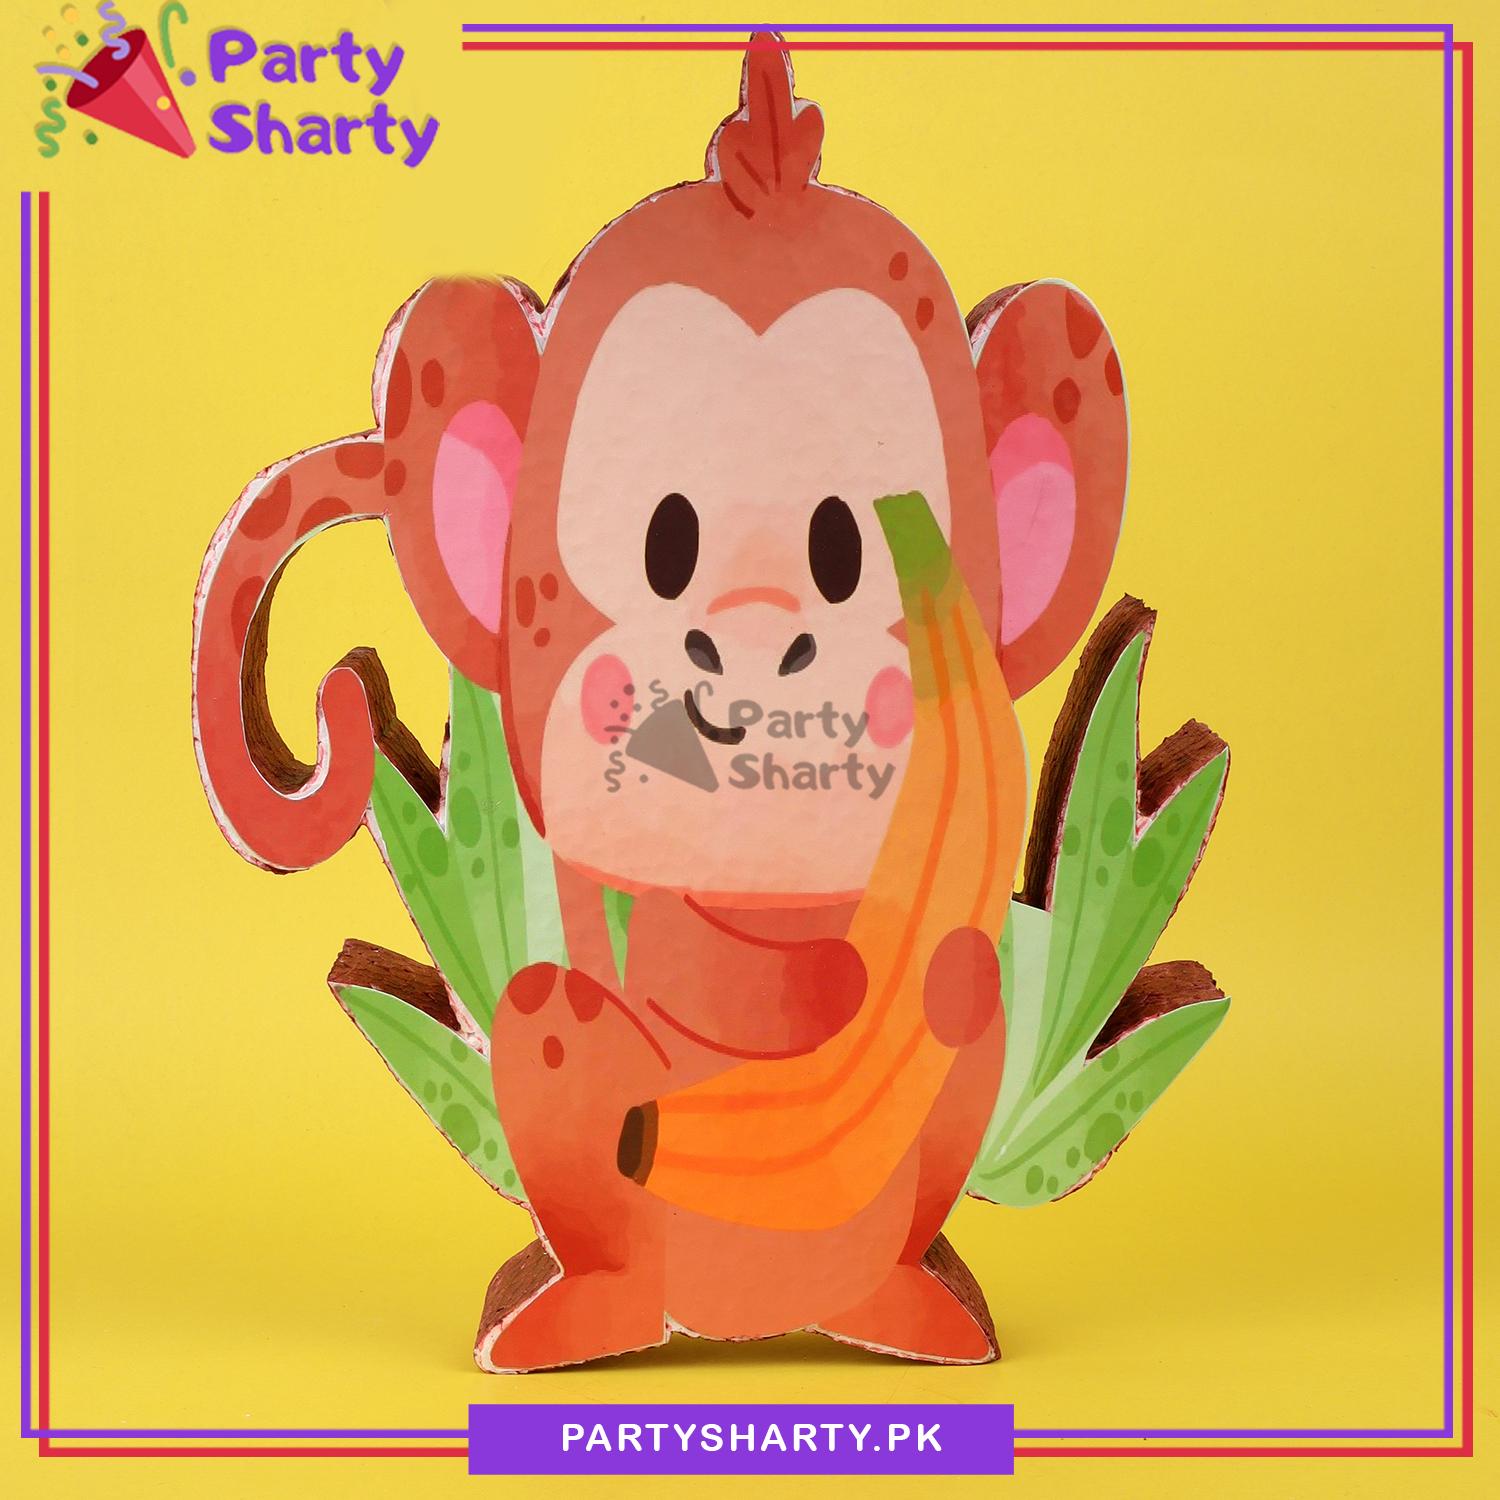 Cute Monkey Character Thermocol Standee For Jungle / Safari Theme Based Birthday Celebration and Party Decoration